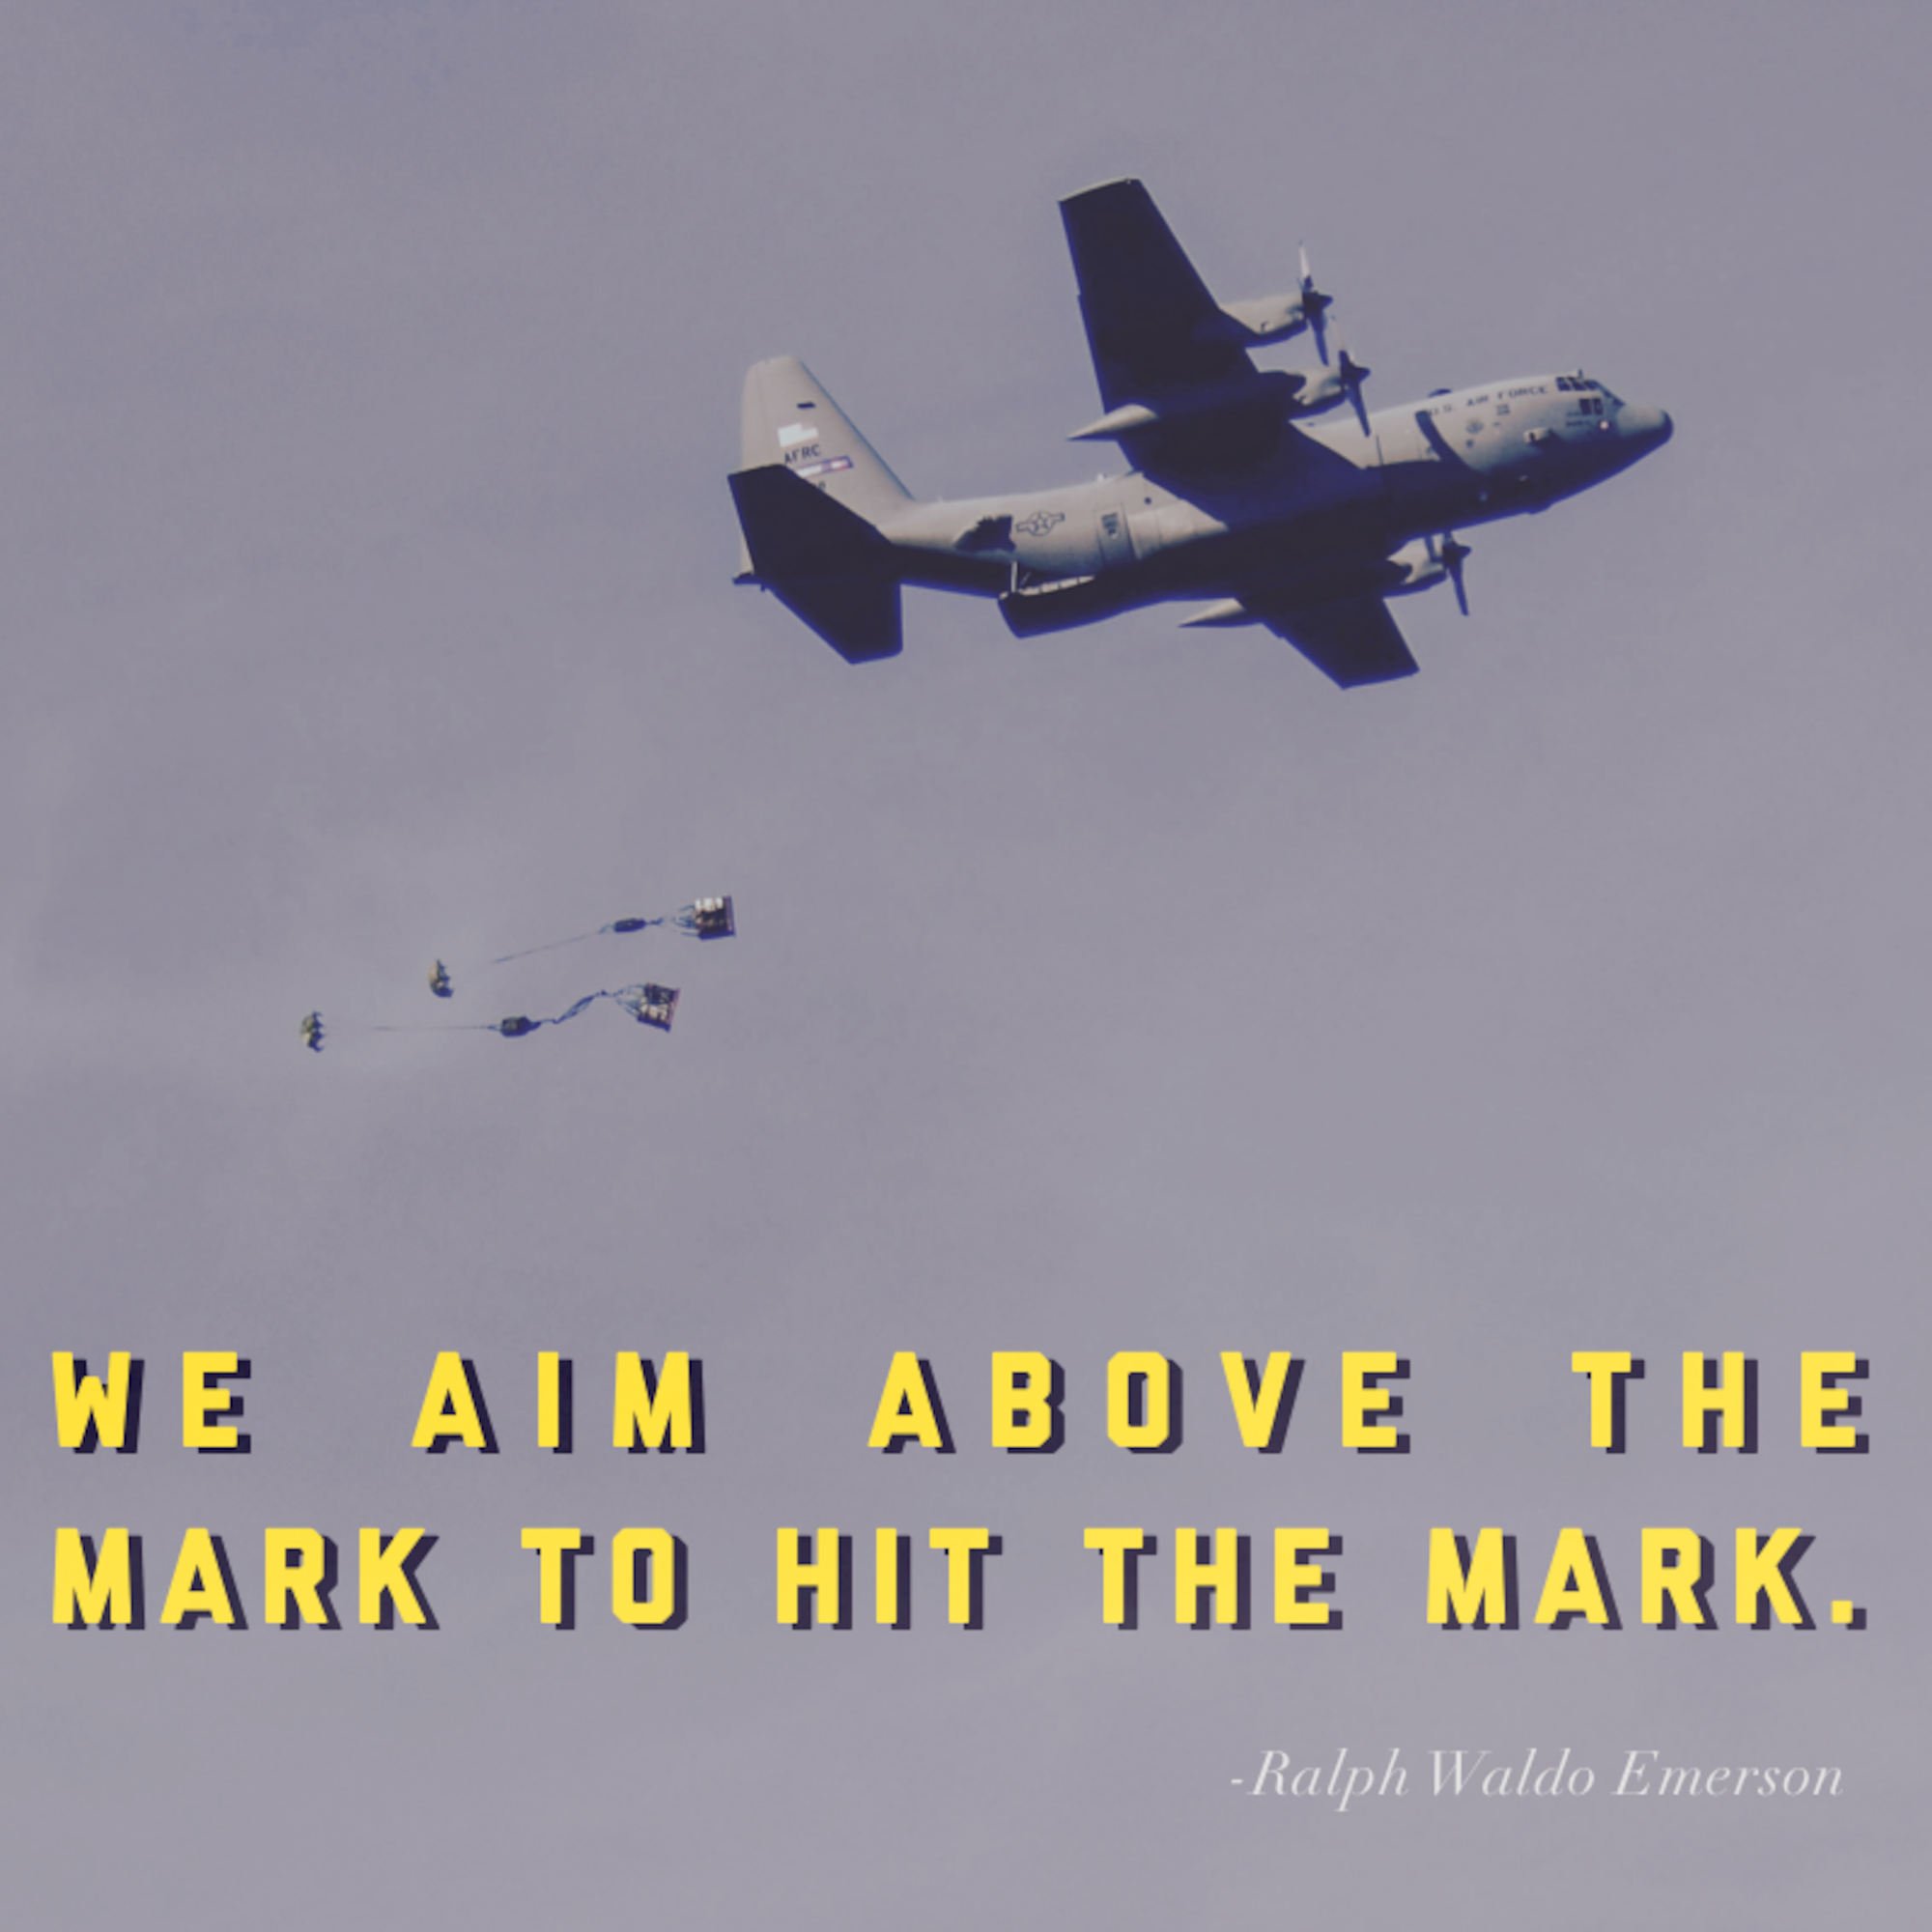 This week's motivation is from Ralph Waldo Emerson, a 19th century American writer. He said, "We aim above the mark to hit the mark." (U.S. Air Force graphic/Andrew Park)